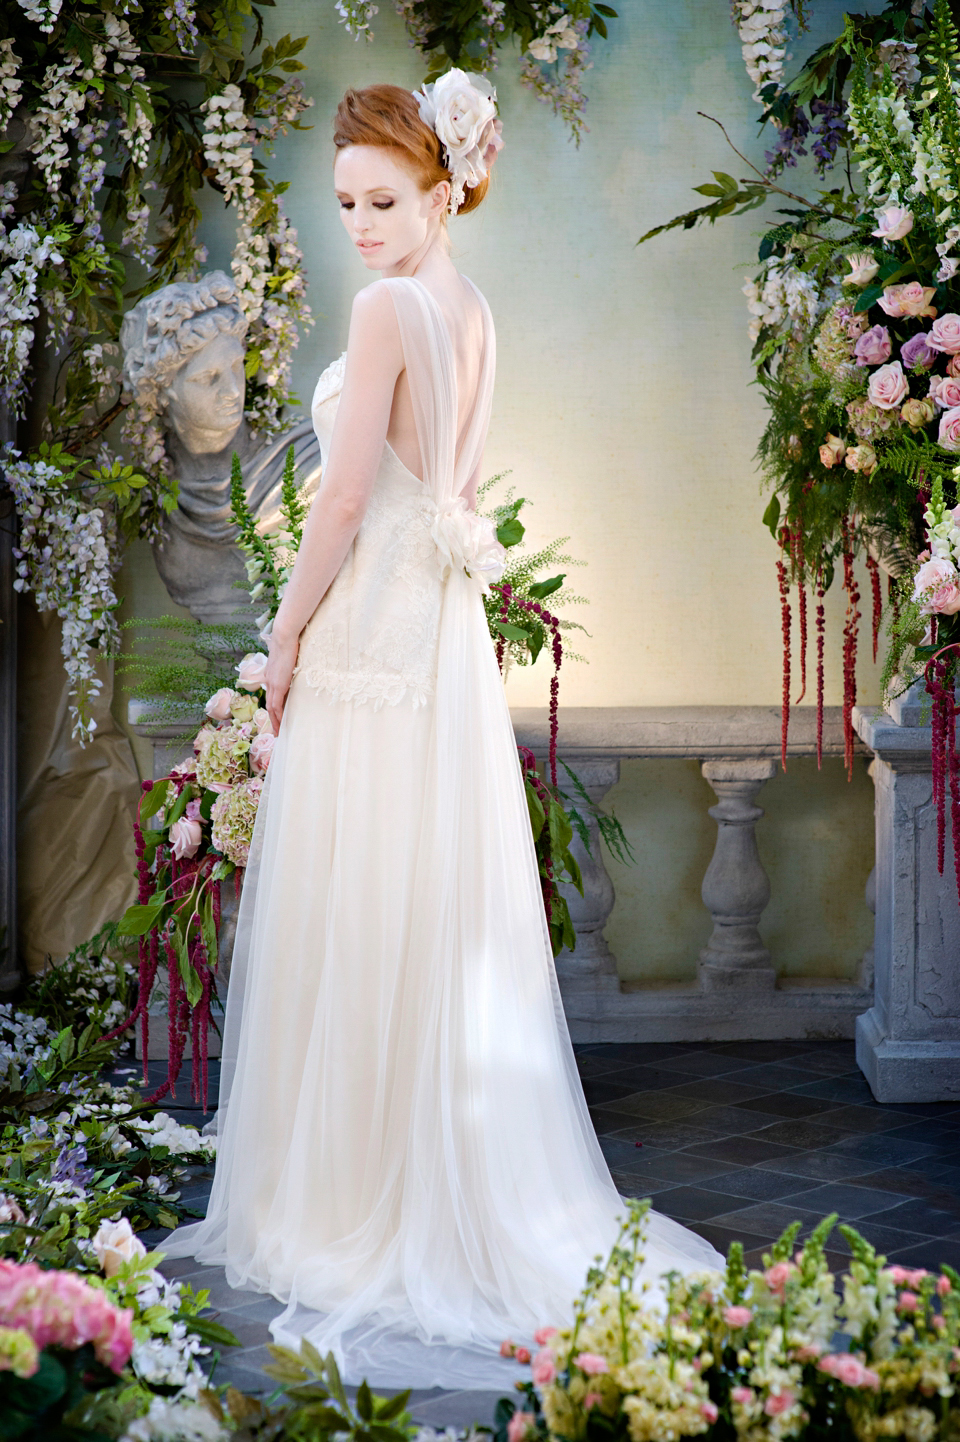 Mesmerise Wedding Dress from Terry Fox's Siren Song Collection